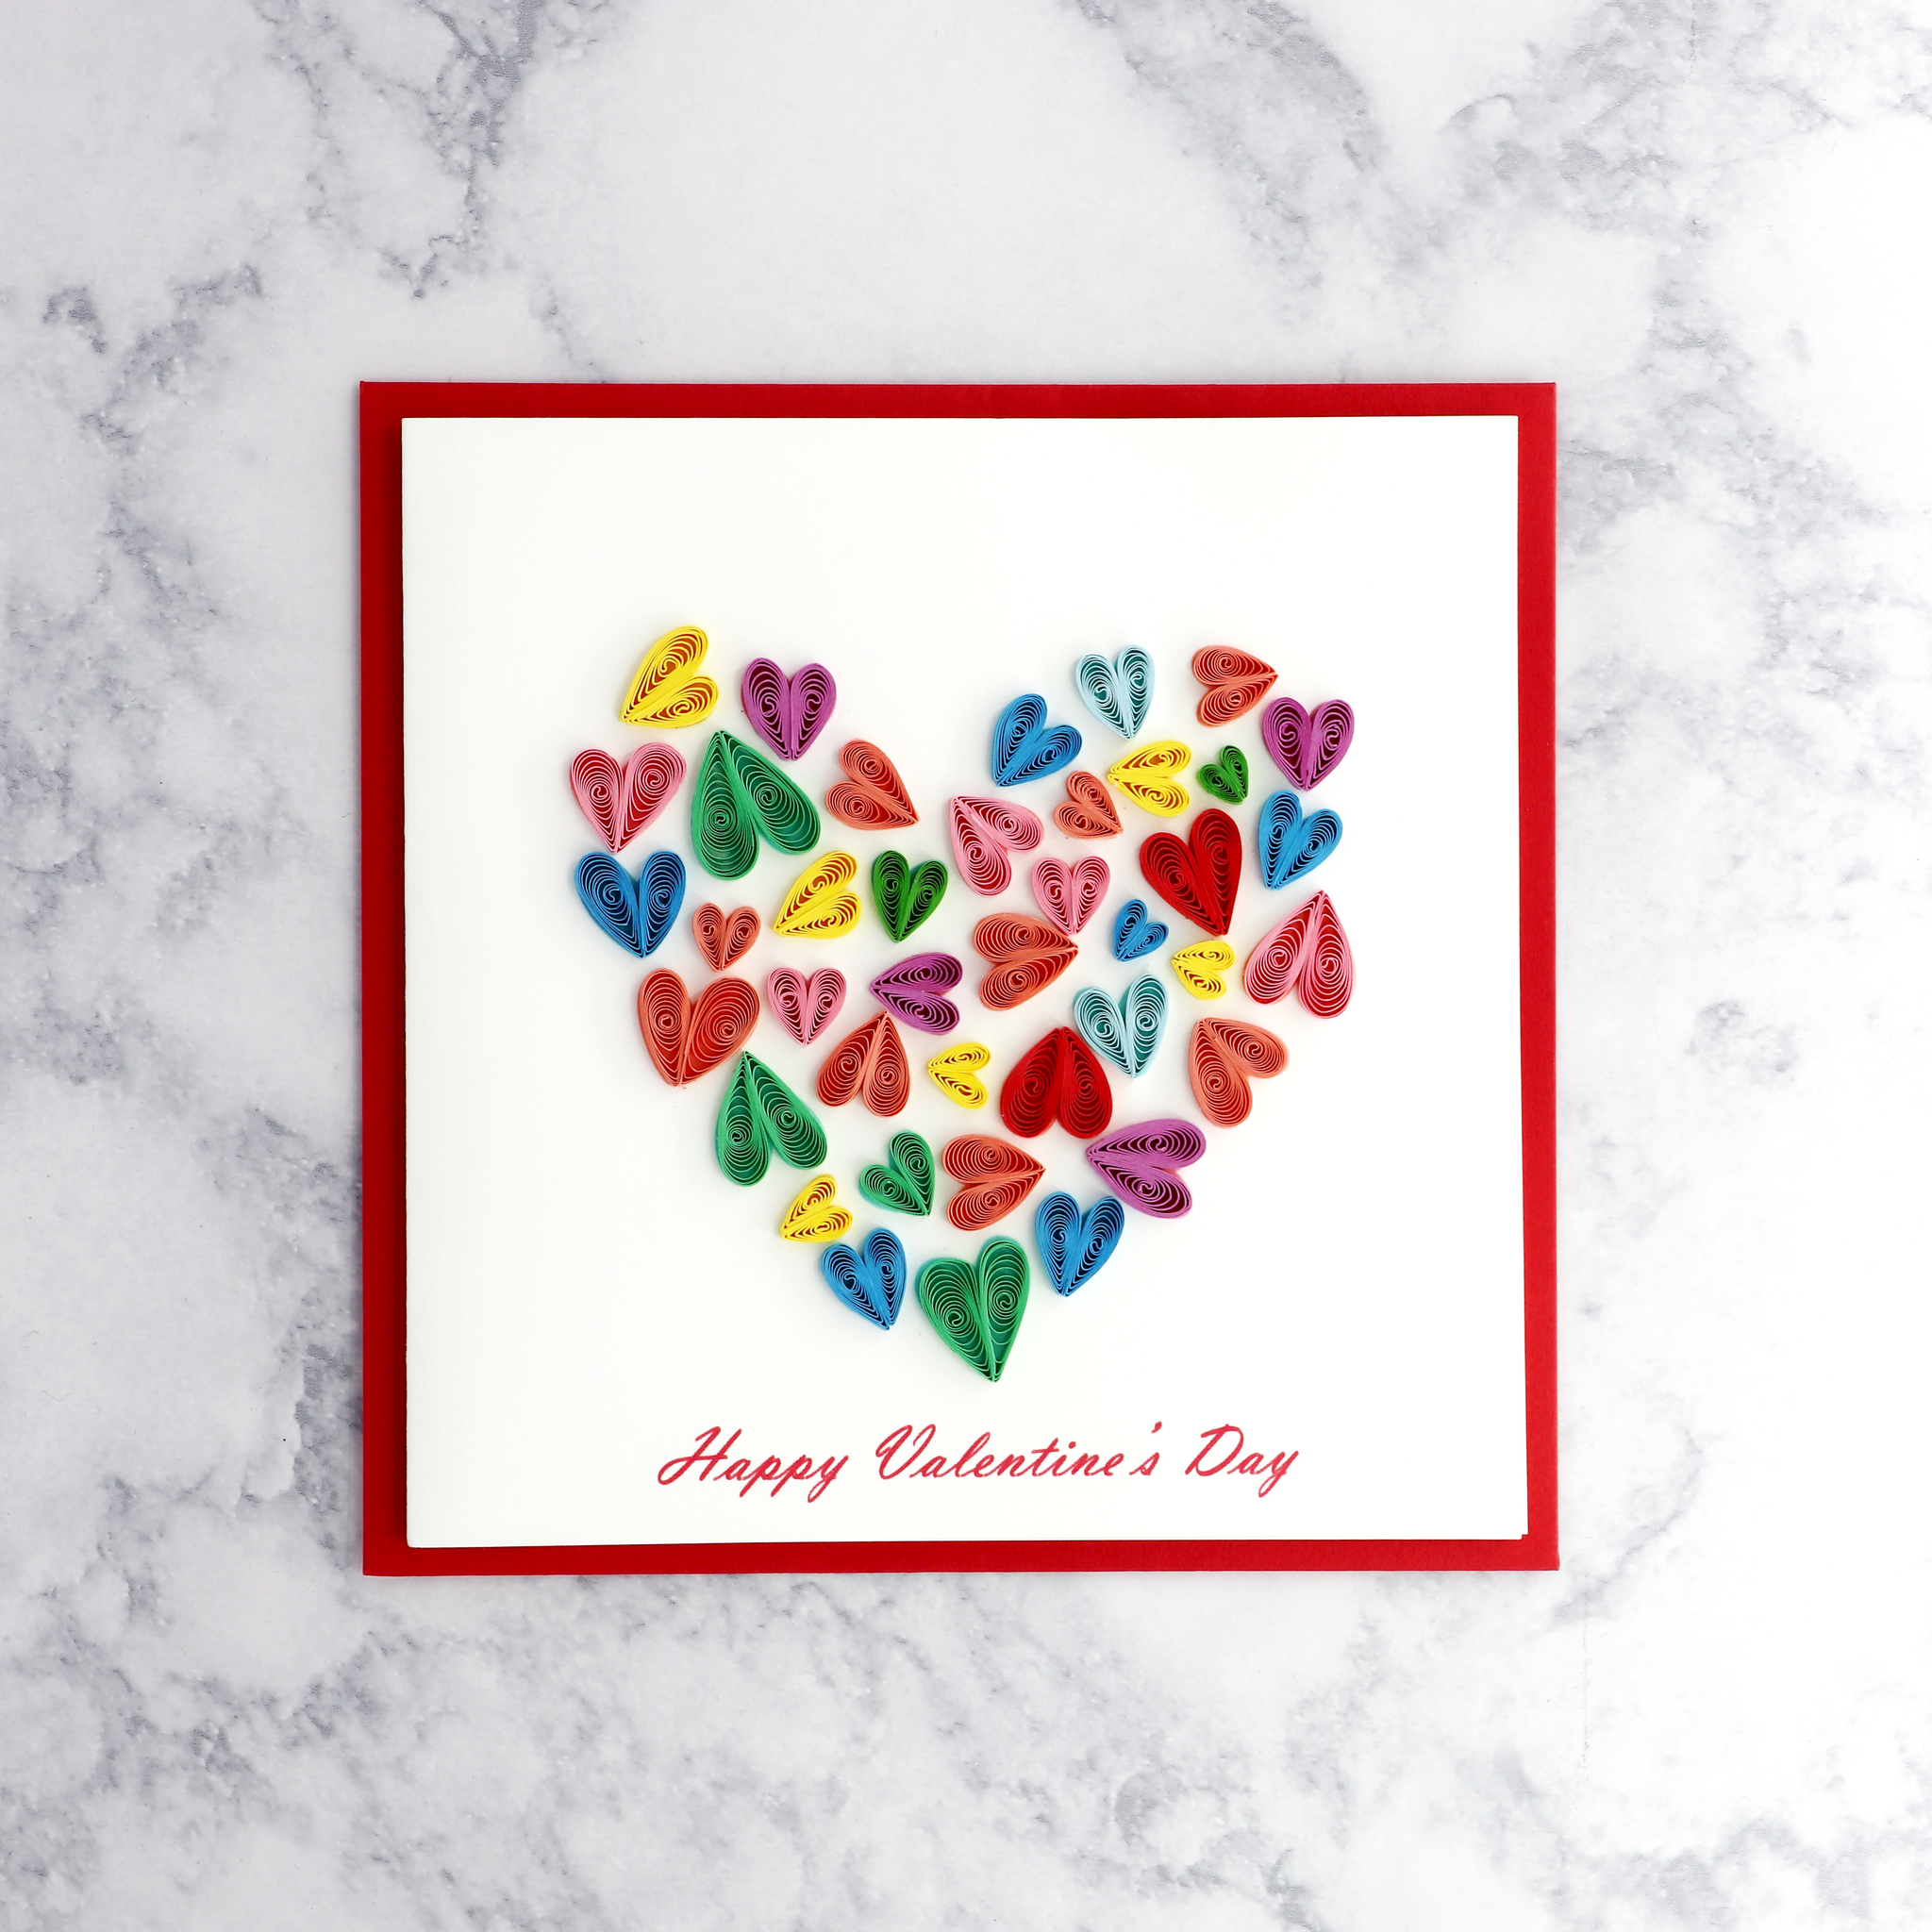 Handmade Colorful Heart Quilling Valentine's Day Card